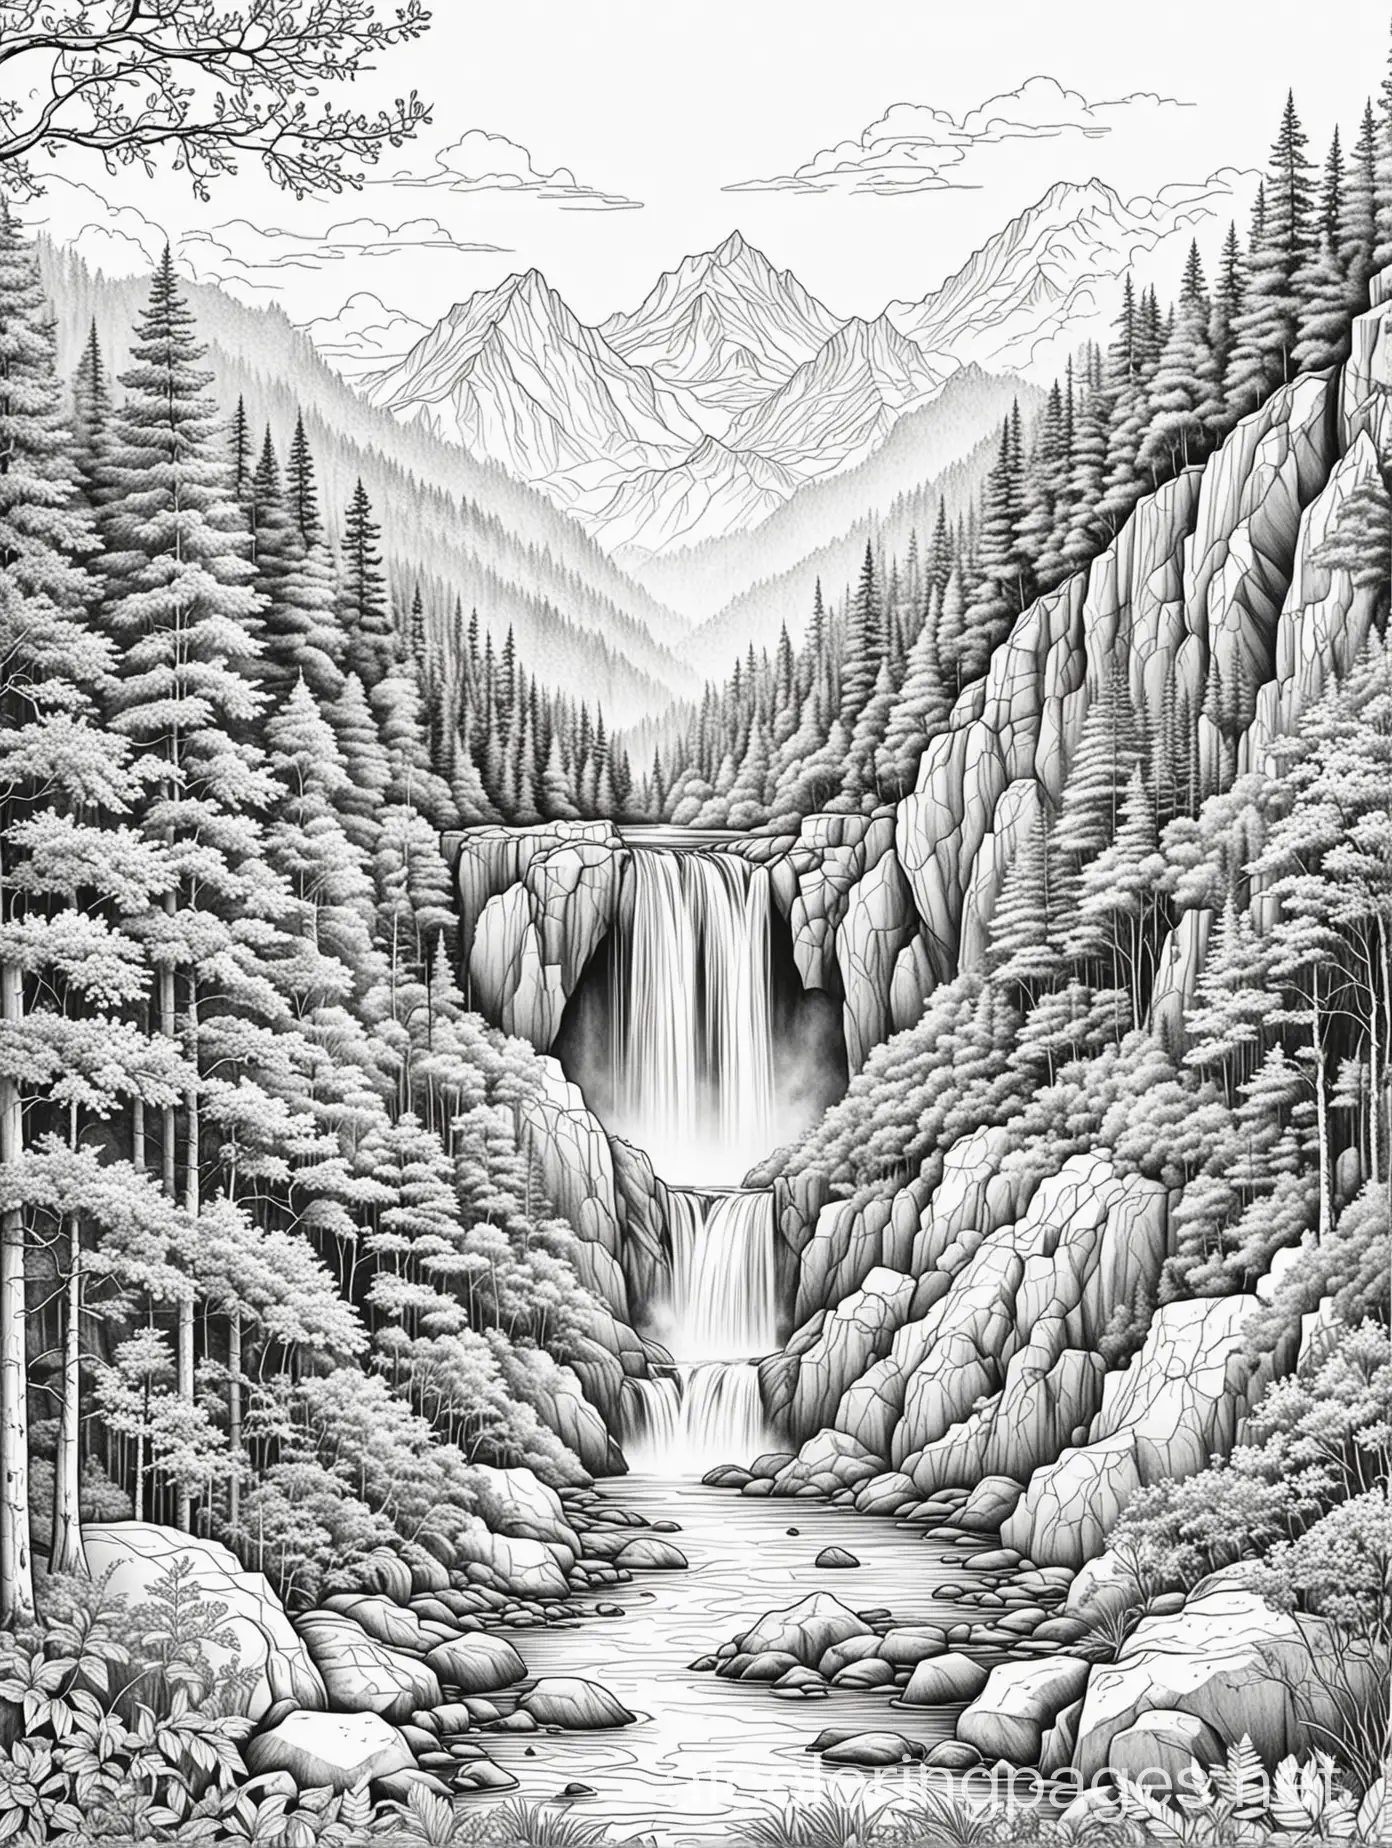 Adult-Coloring-Page-Mountain-Landscape-with-Waterfall-Black-and-White-Line-Art